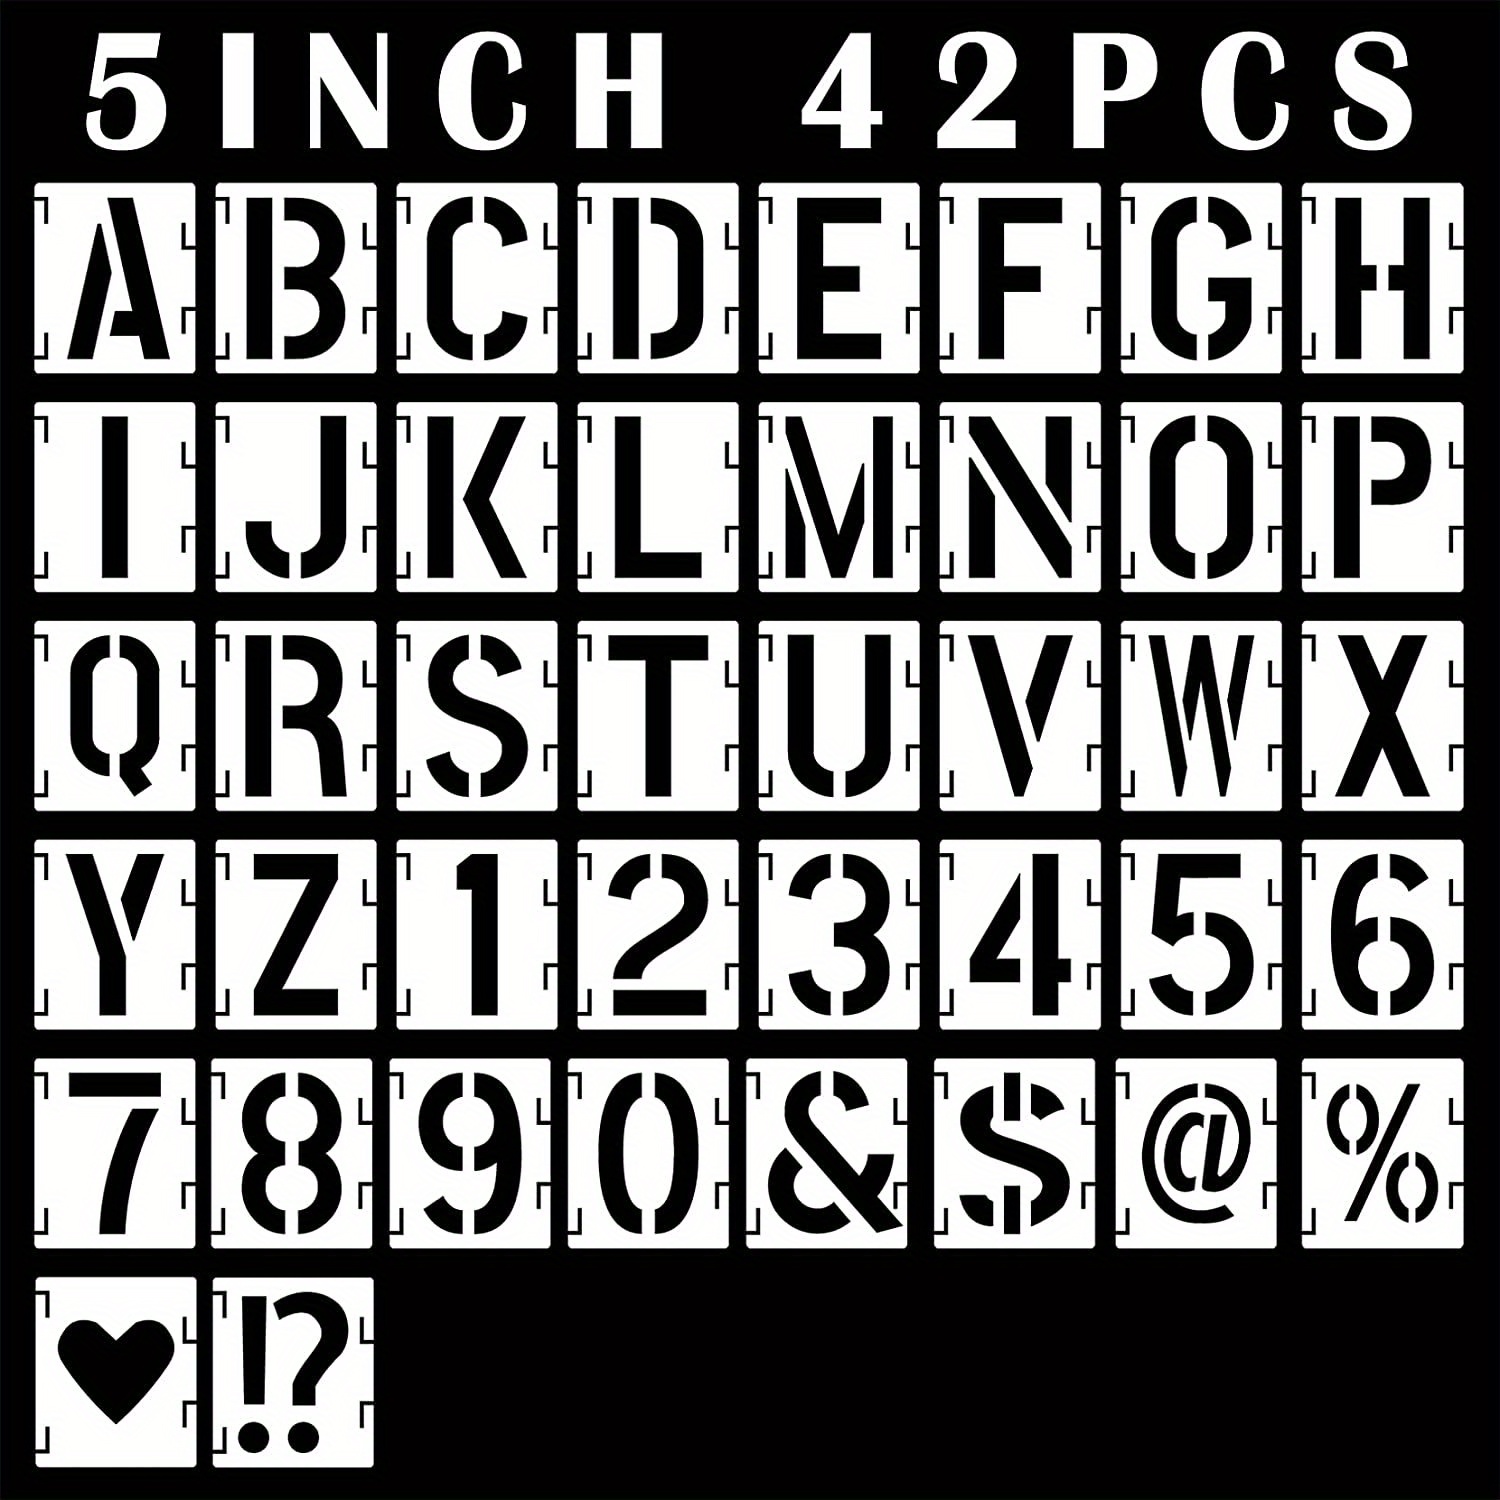 2 Inch Letter Stencils Symbol Numbers Craft Stencils for Painting on Wood,  47 Pcs Reusable Alphabet Templates Interlocking Stencil Kit for Wall Fabric